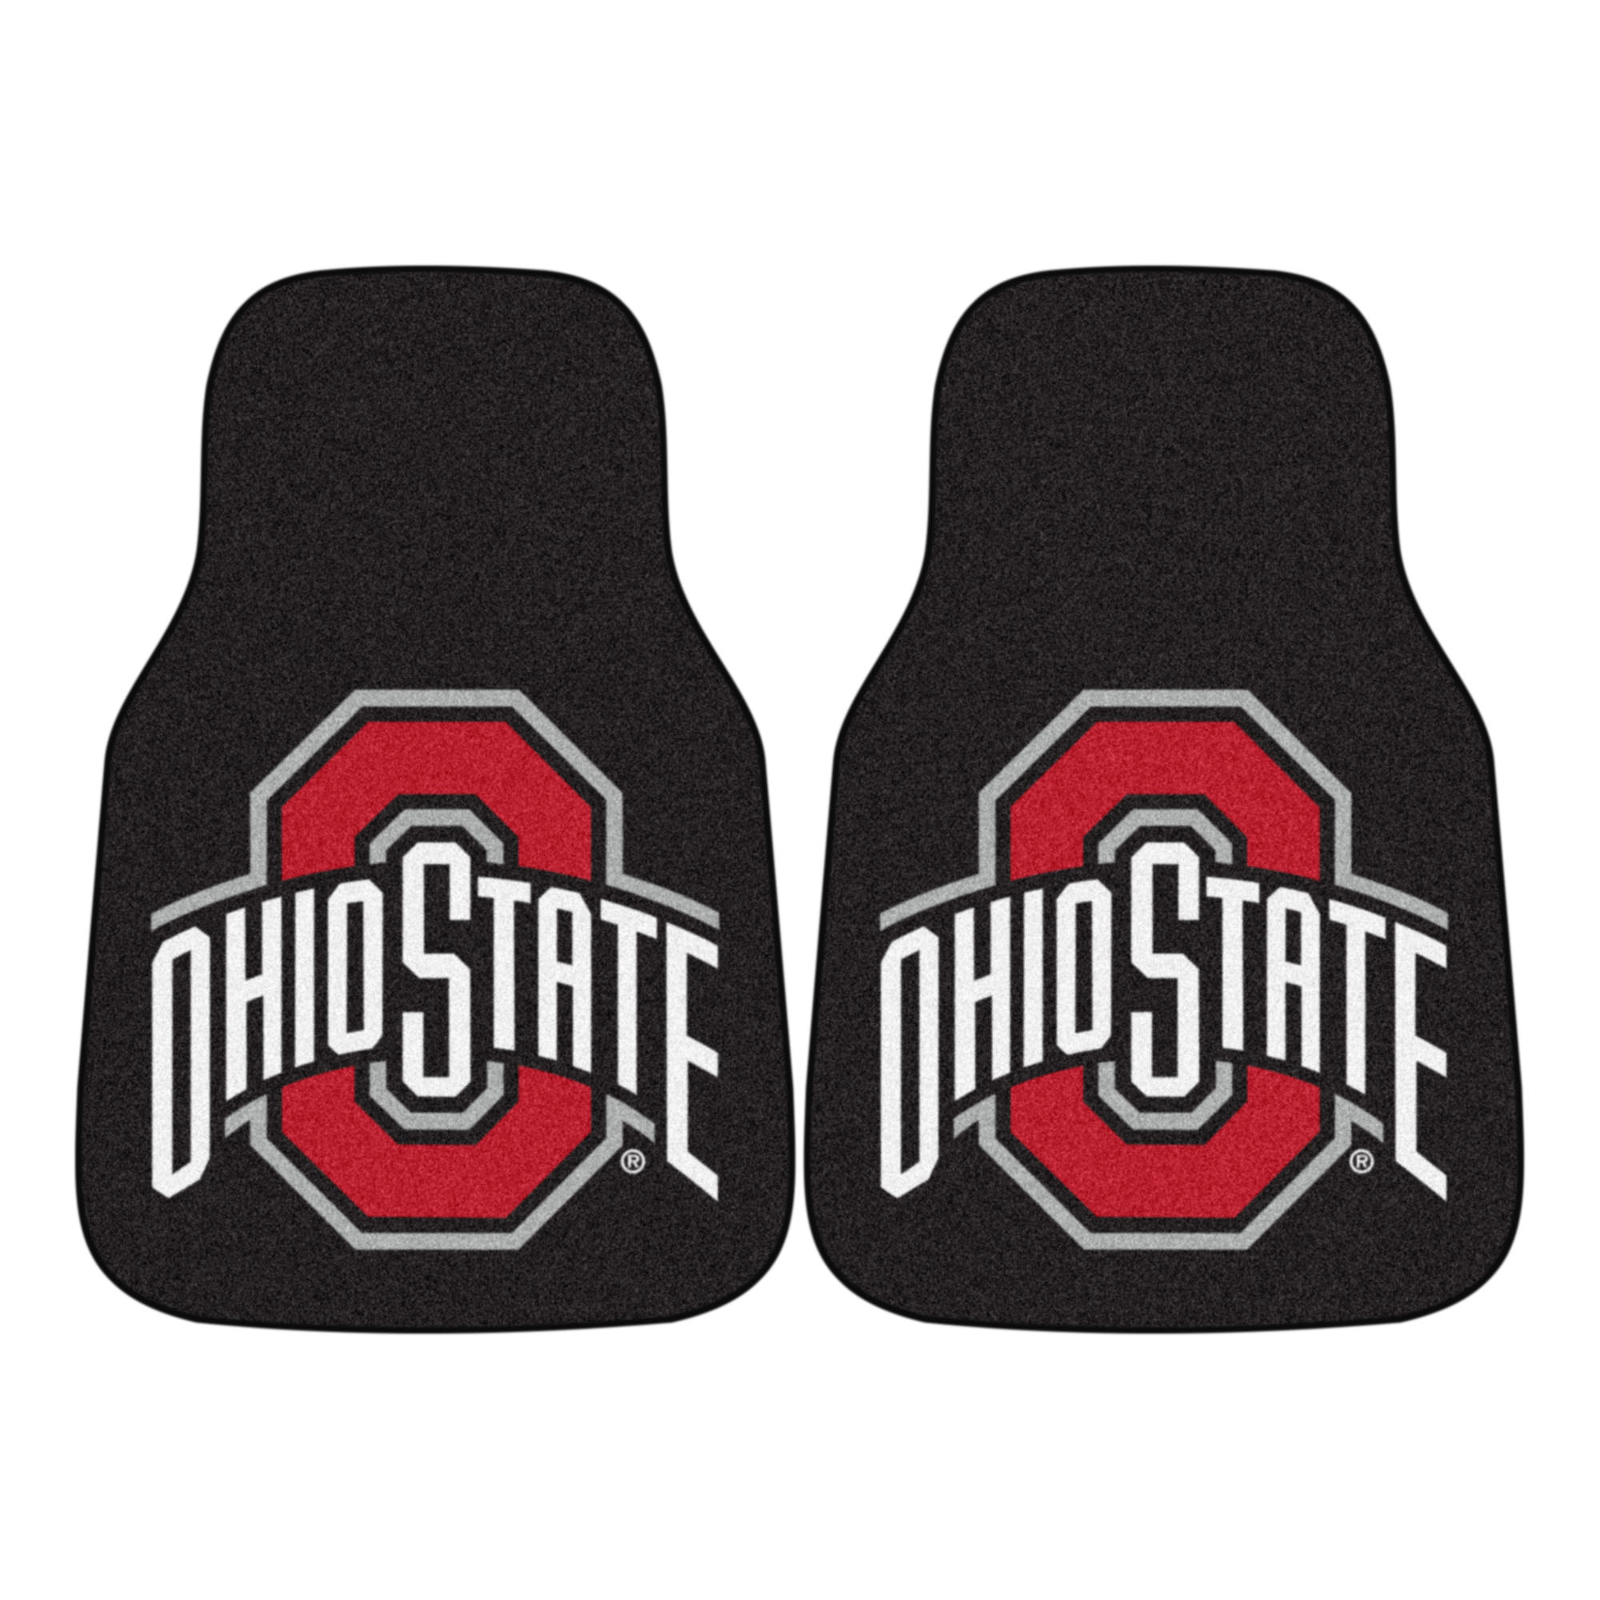 Ohio State 2-piece Carpeted Car Mats 18" x 27"